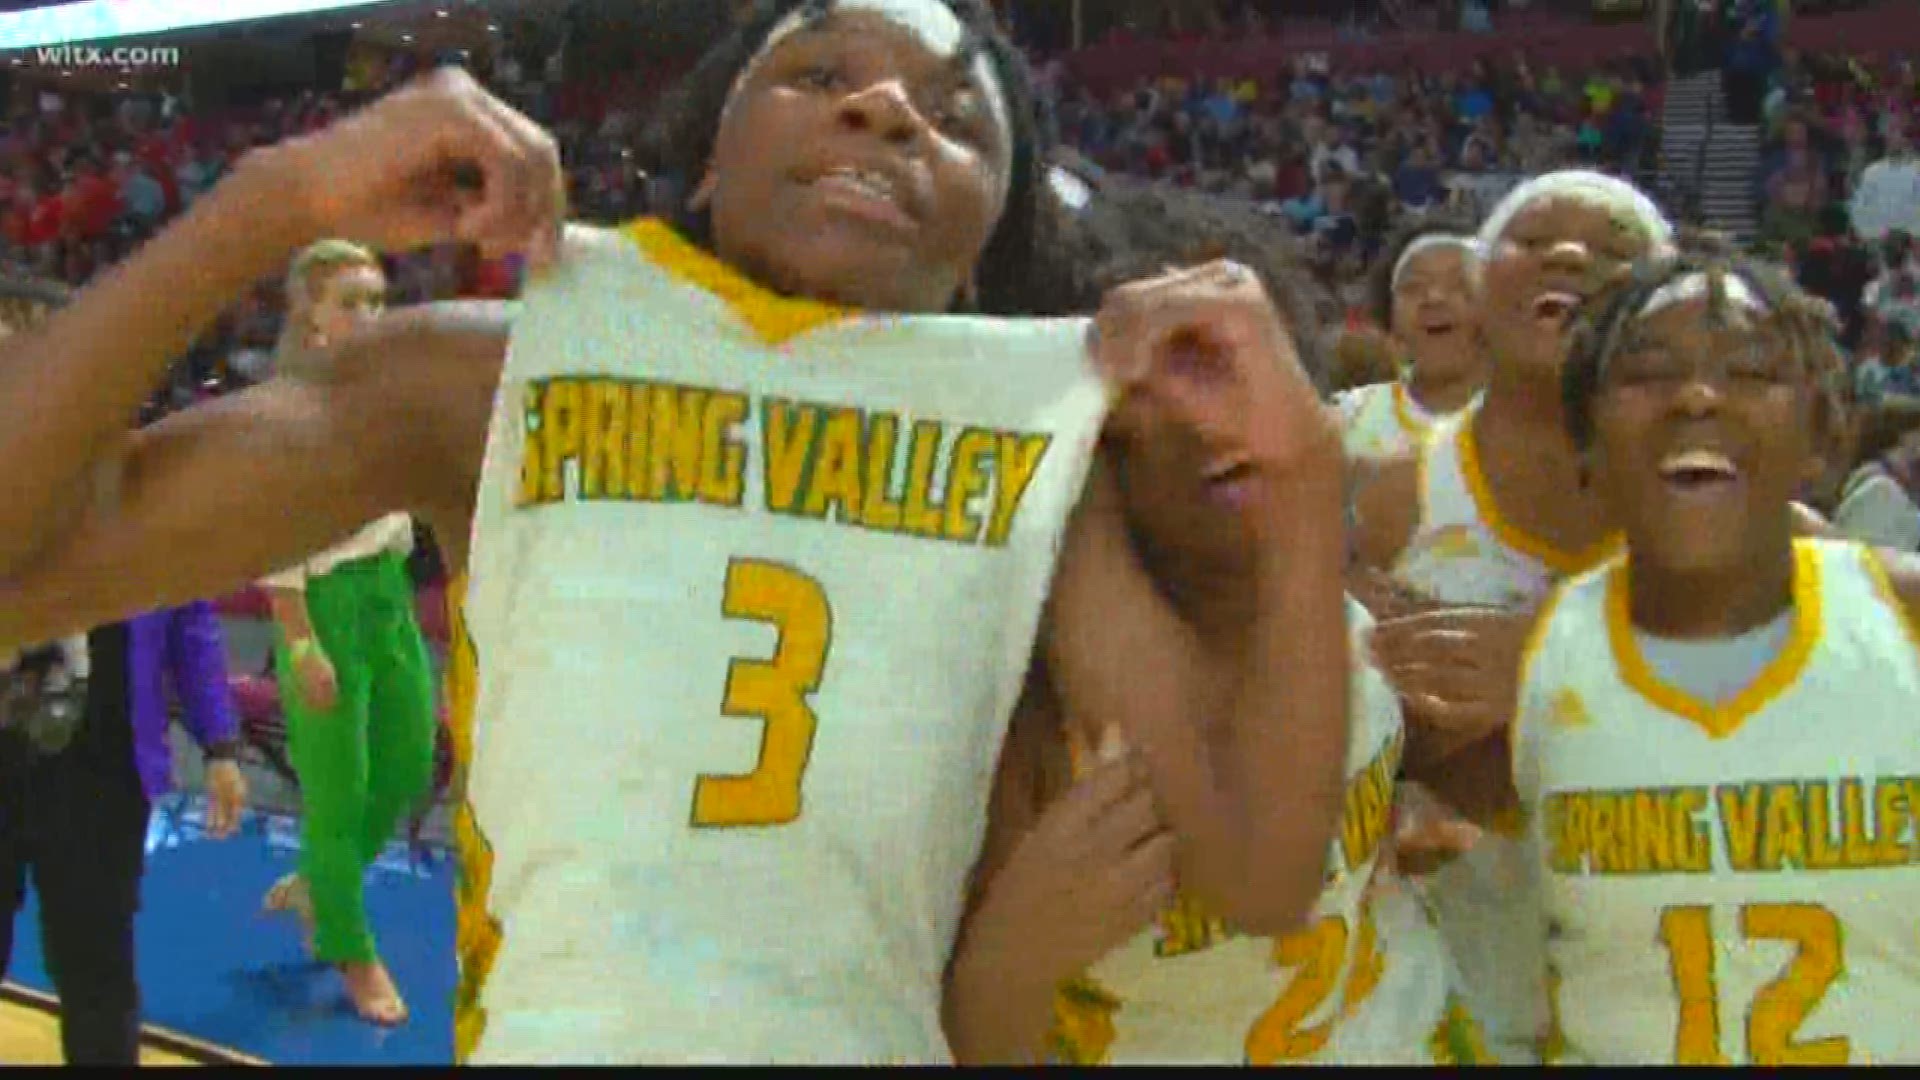 The Spring Valley Vikings are one win away from a goal they set this season and the season before as they are one win away from repeating as 5A champions. They defeat Sumter 58-42 in the Upper State Finals to advance.